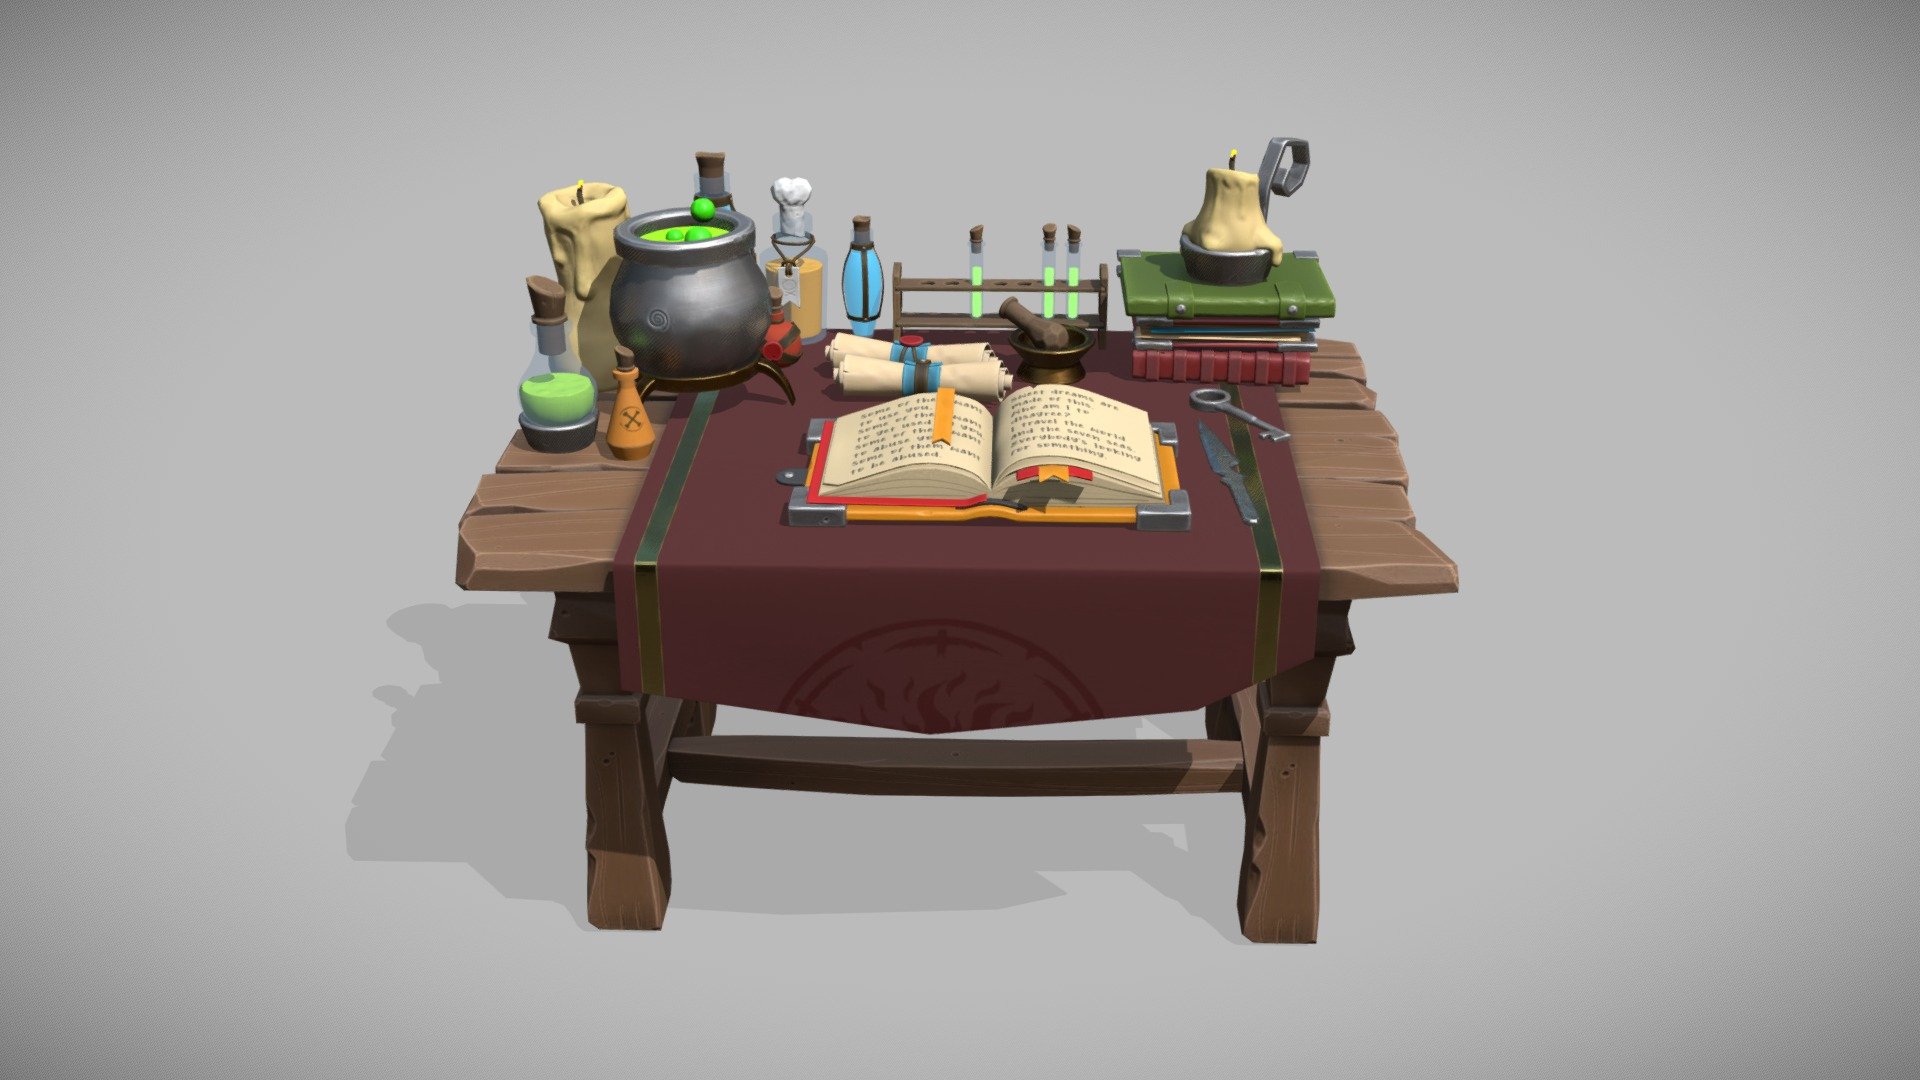 Stylized Alchemy Table Low Poly Game Ready PBR

I made this 3d model at 3ds Max, added some details at Zbrush, bake all maps at Marmoset, painted at Substance Painter and rendered at Marmoset.

As a result, I got Stylized Low Poly Game Ready Alchemy Table Low Poly Game Ready with PBR textures.

Please rate and review this Product ! It could be very helpful for me. Feel free to write me a message if you have any questions.

Thank you for your attention 3d model